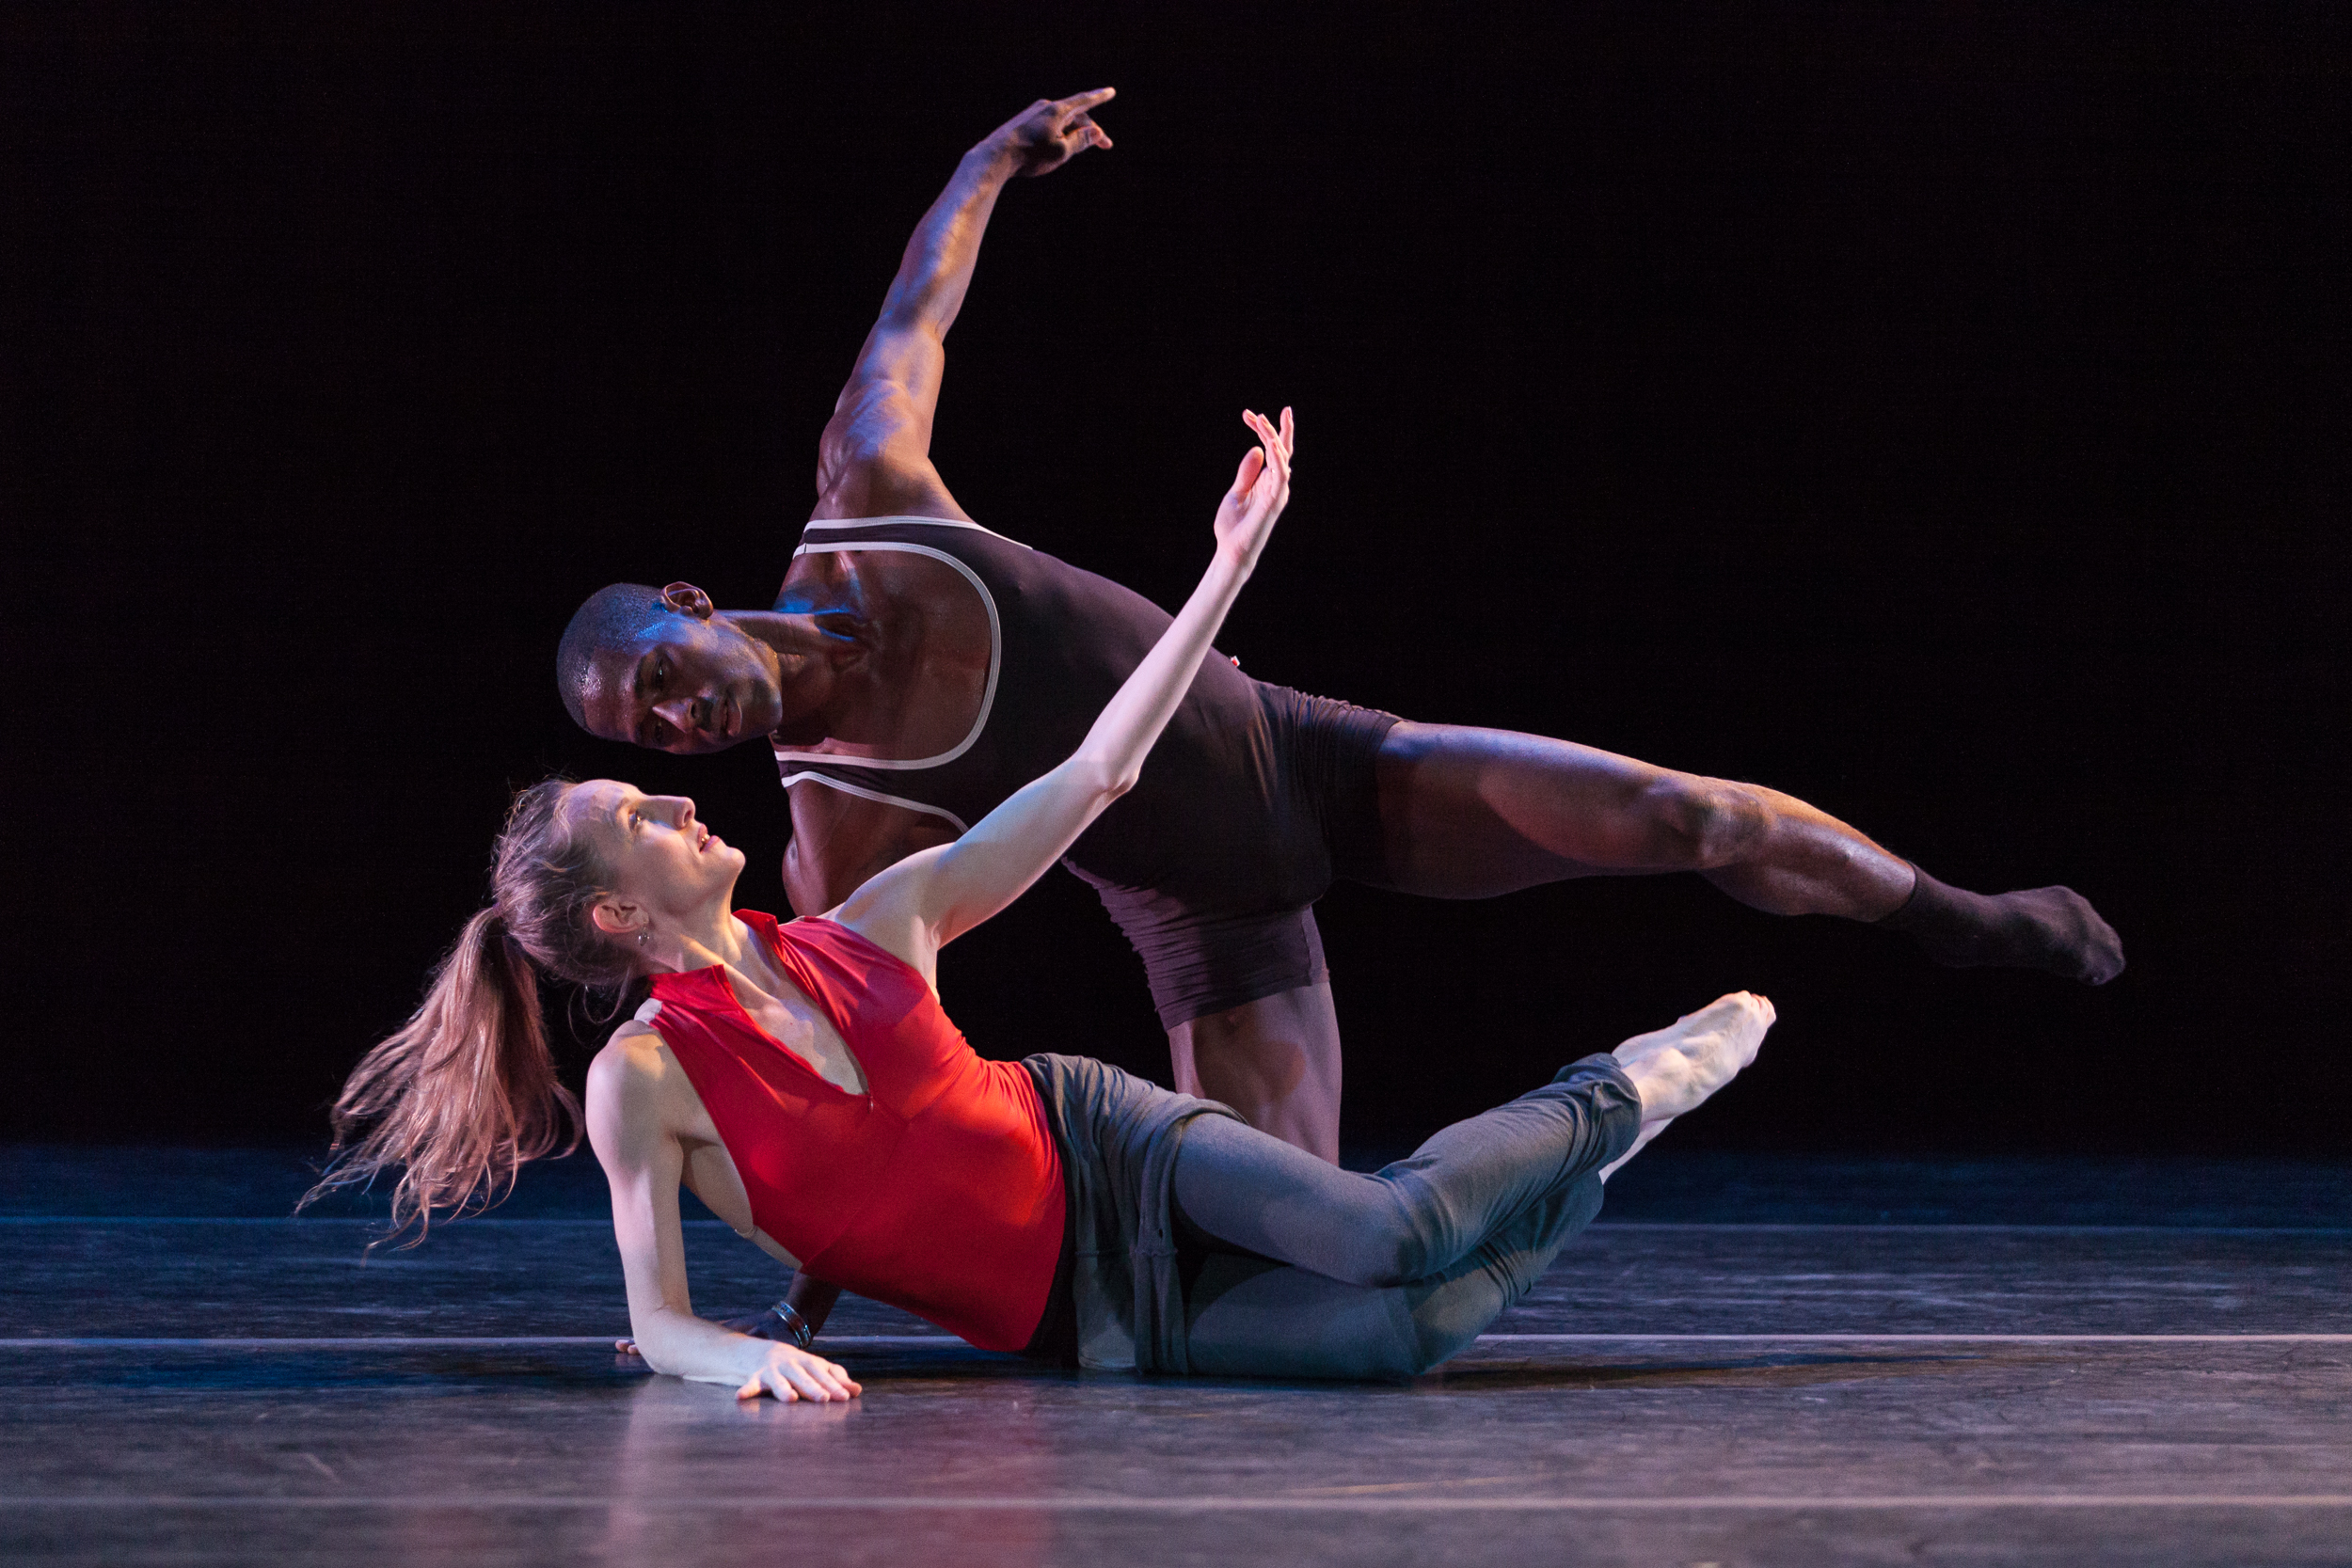  Dancers Lloyd Knight and Wendy Whelan during an on stage rehearsal for the Jacob’s Pillow Dance Festival annual gala.  